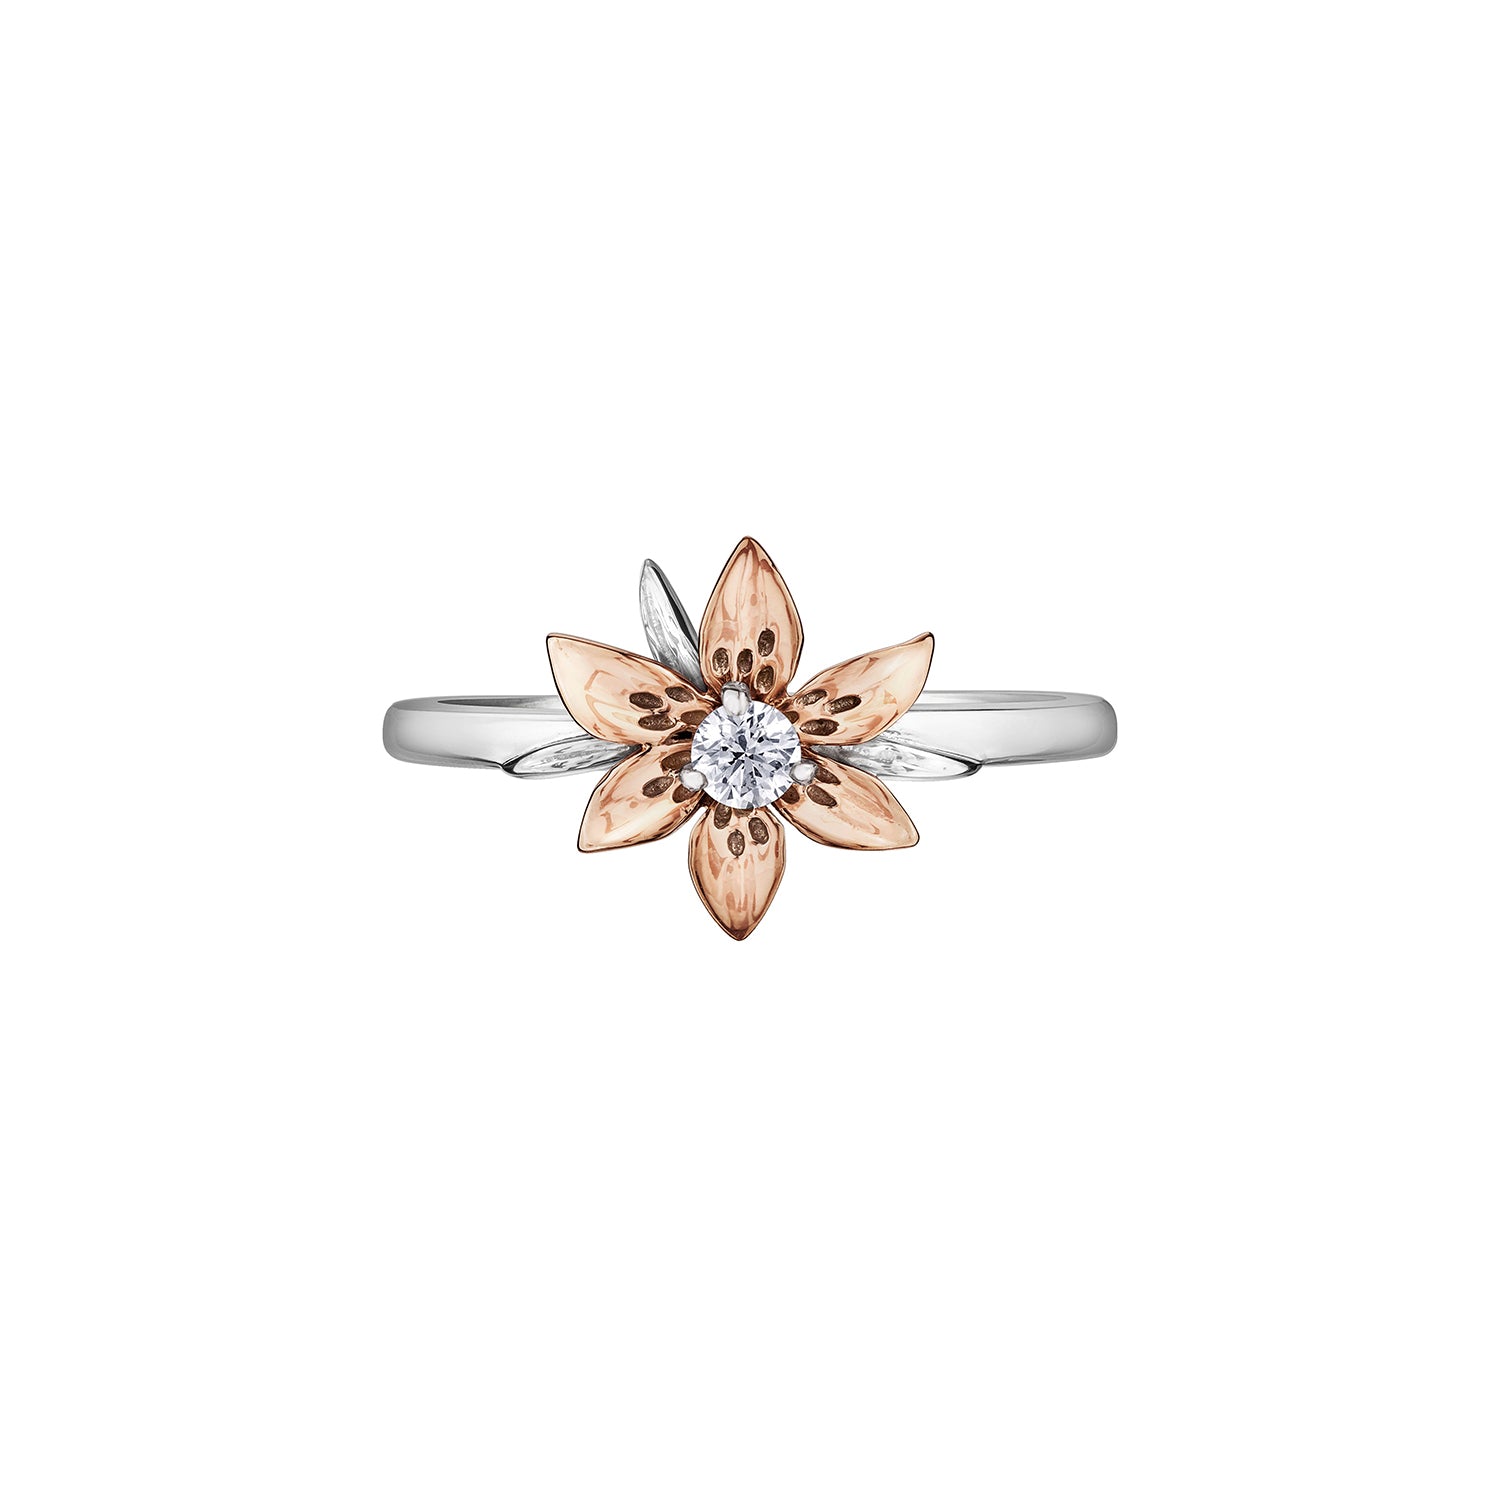 Crafted in 14KT white and rose Certified Canadian Gold, this ring features a Saskatchewan western red lily flower set with a round brilliant-cut Canadian diamond